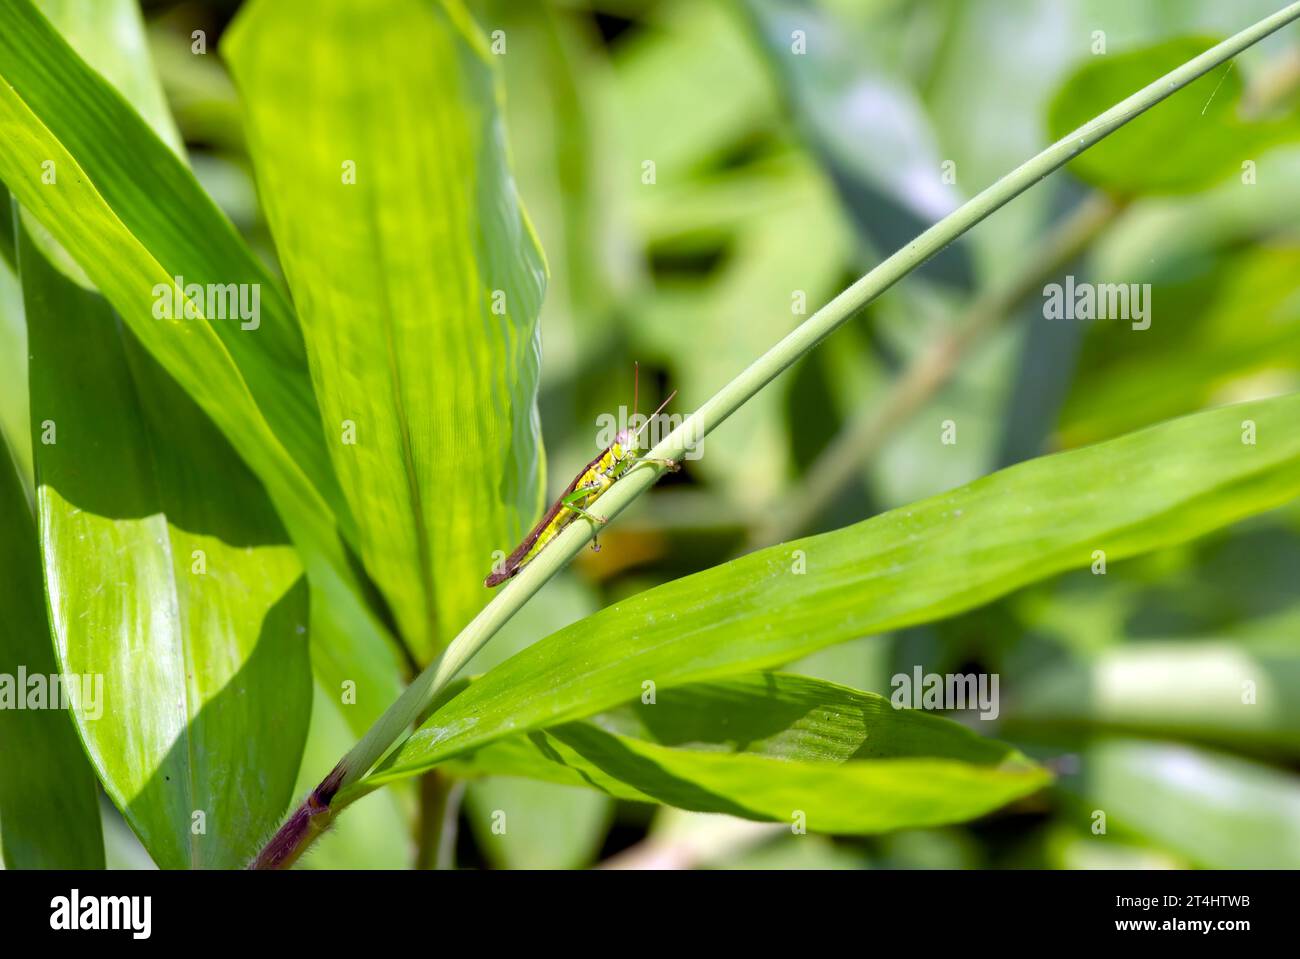 Young bamboo plant, Bambusa sp., in the nursery for natural background. Shallow focus. Stock Photo